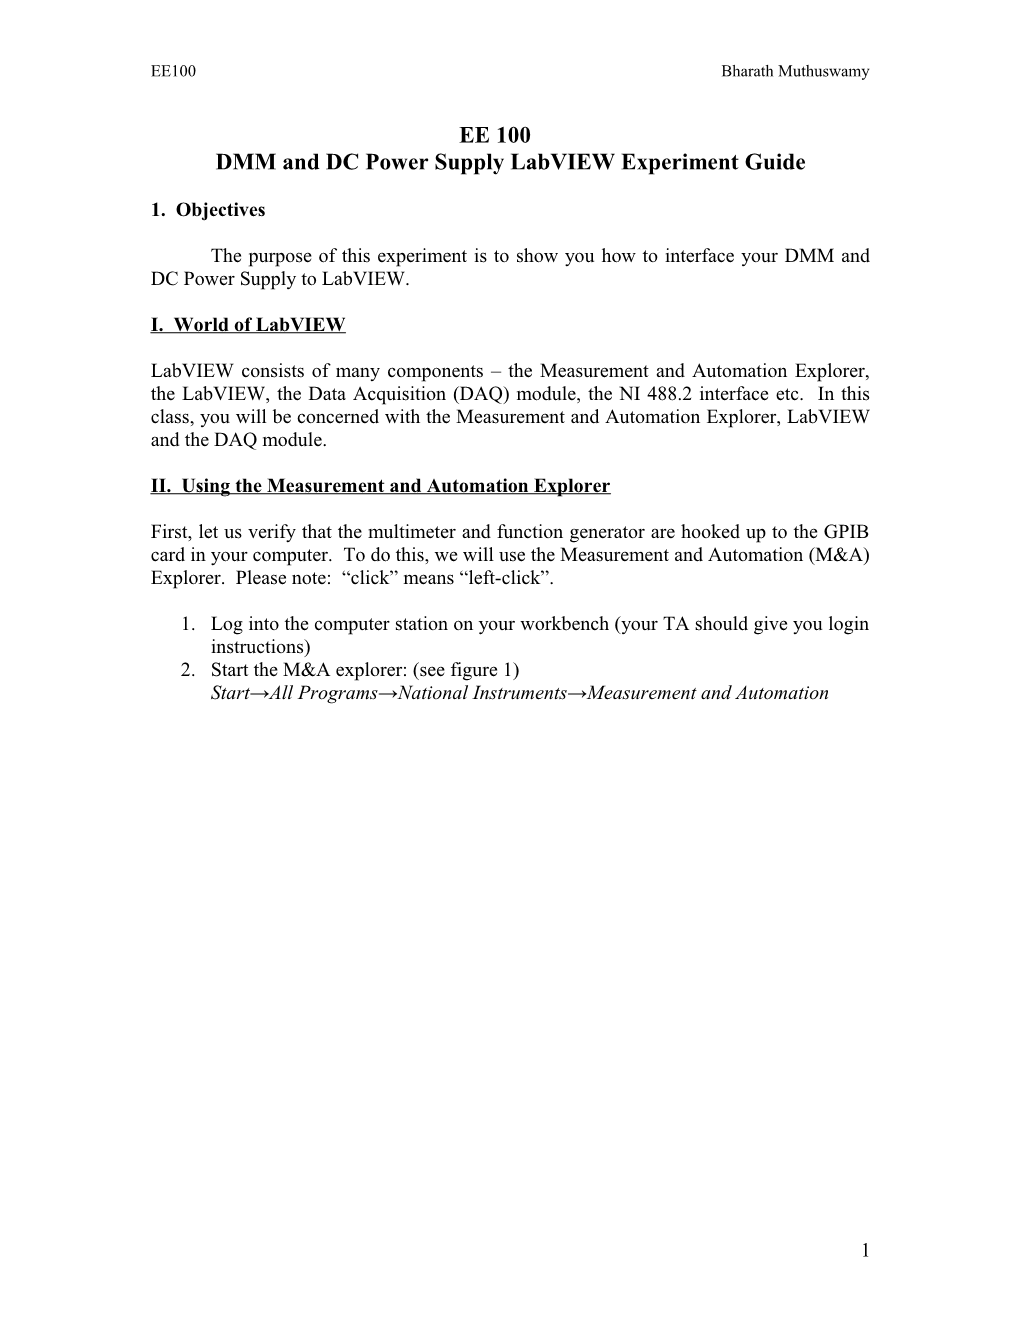 DMM and DC Power Supply Labview Experiment Guide